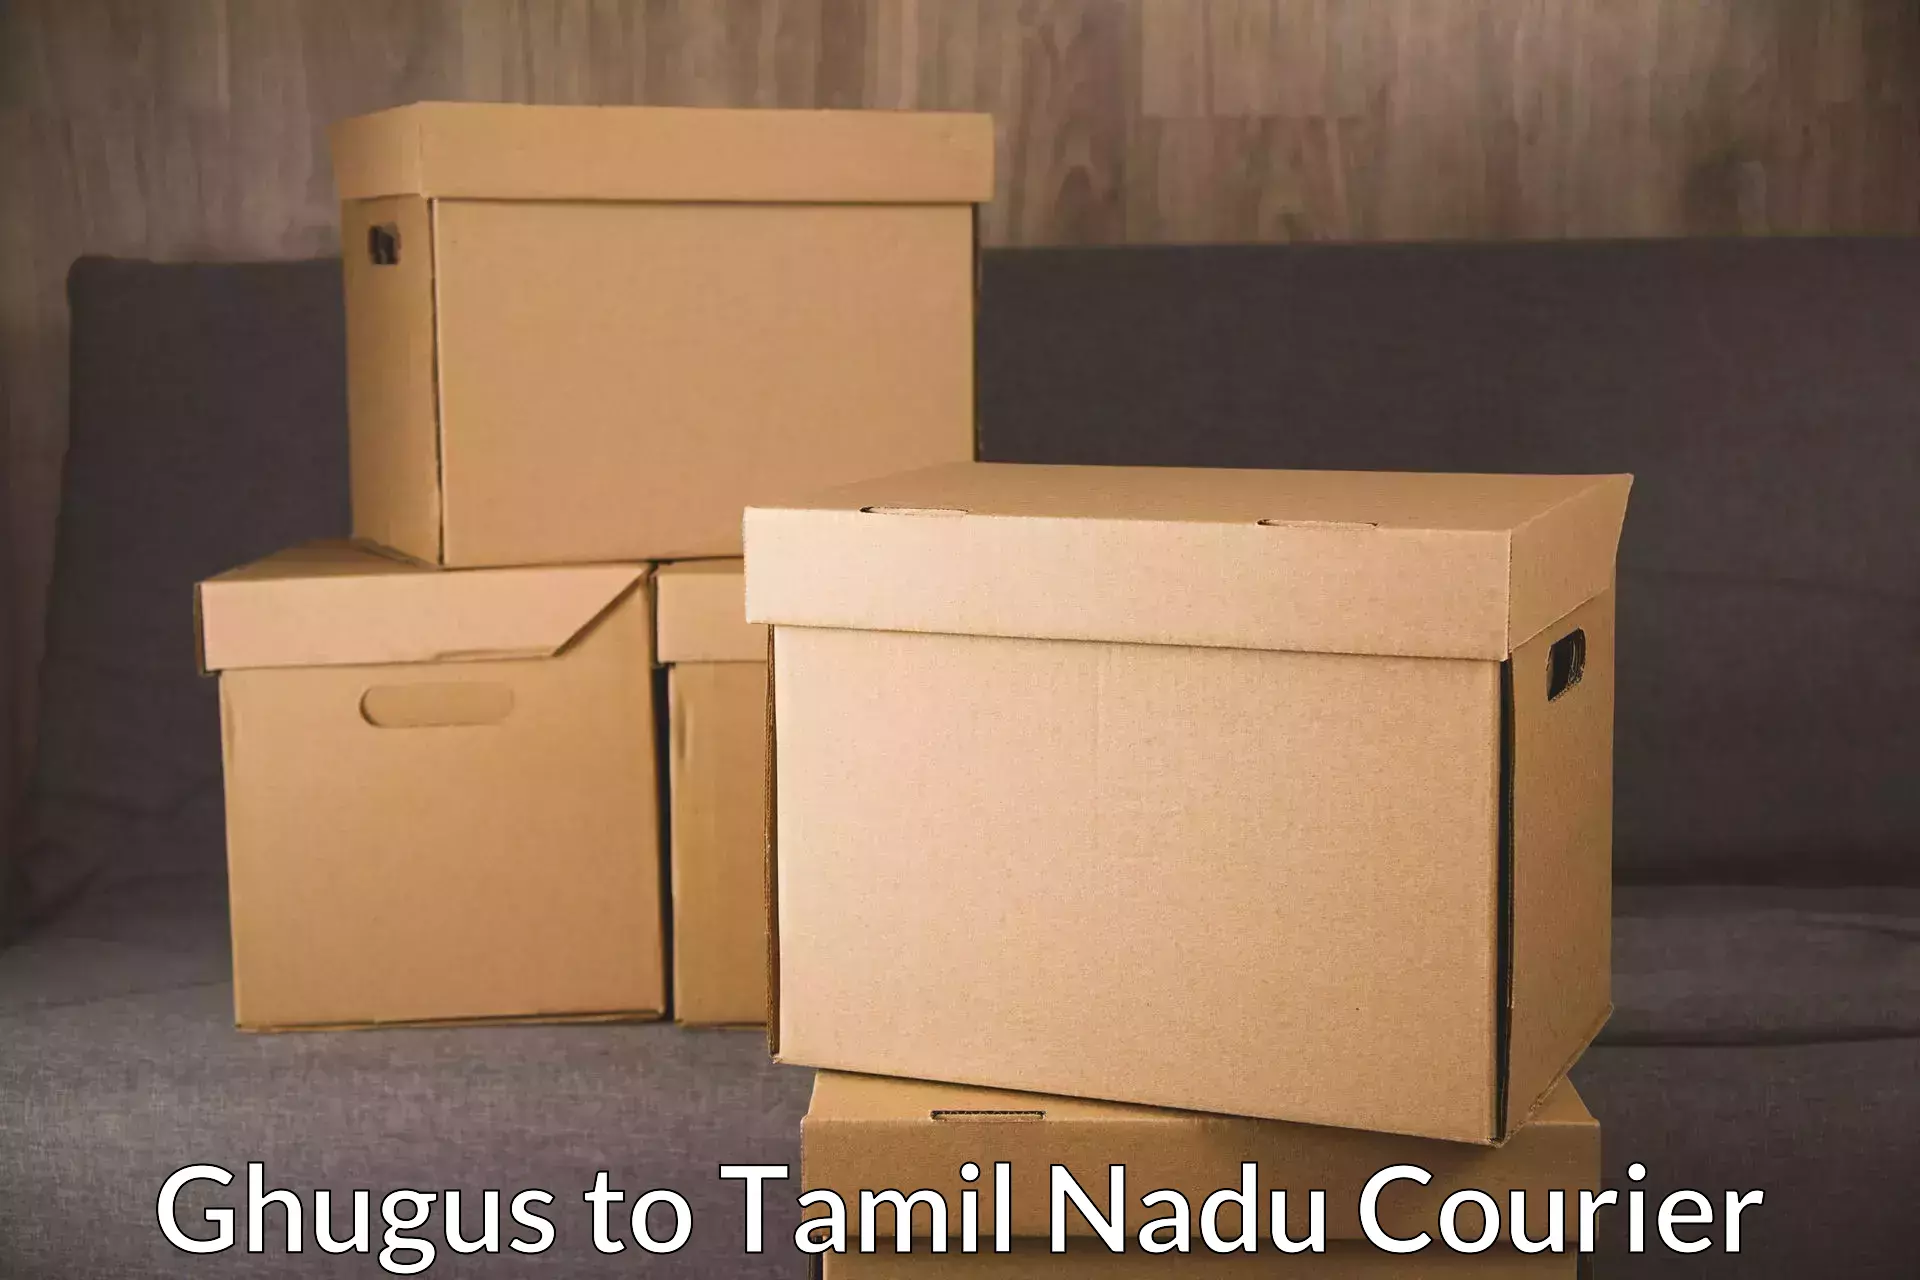 High-capacity shipping options Ghugus to Trichy